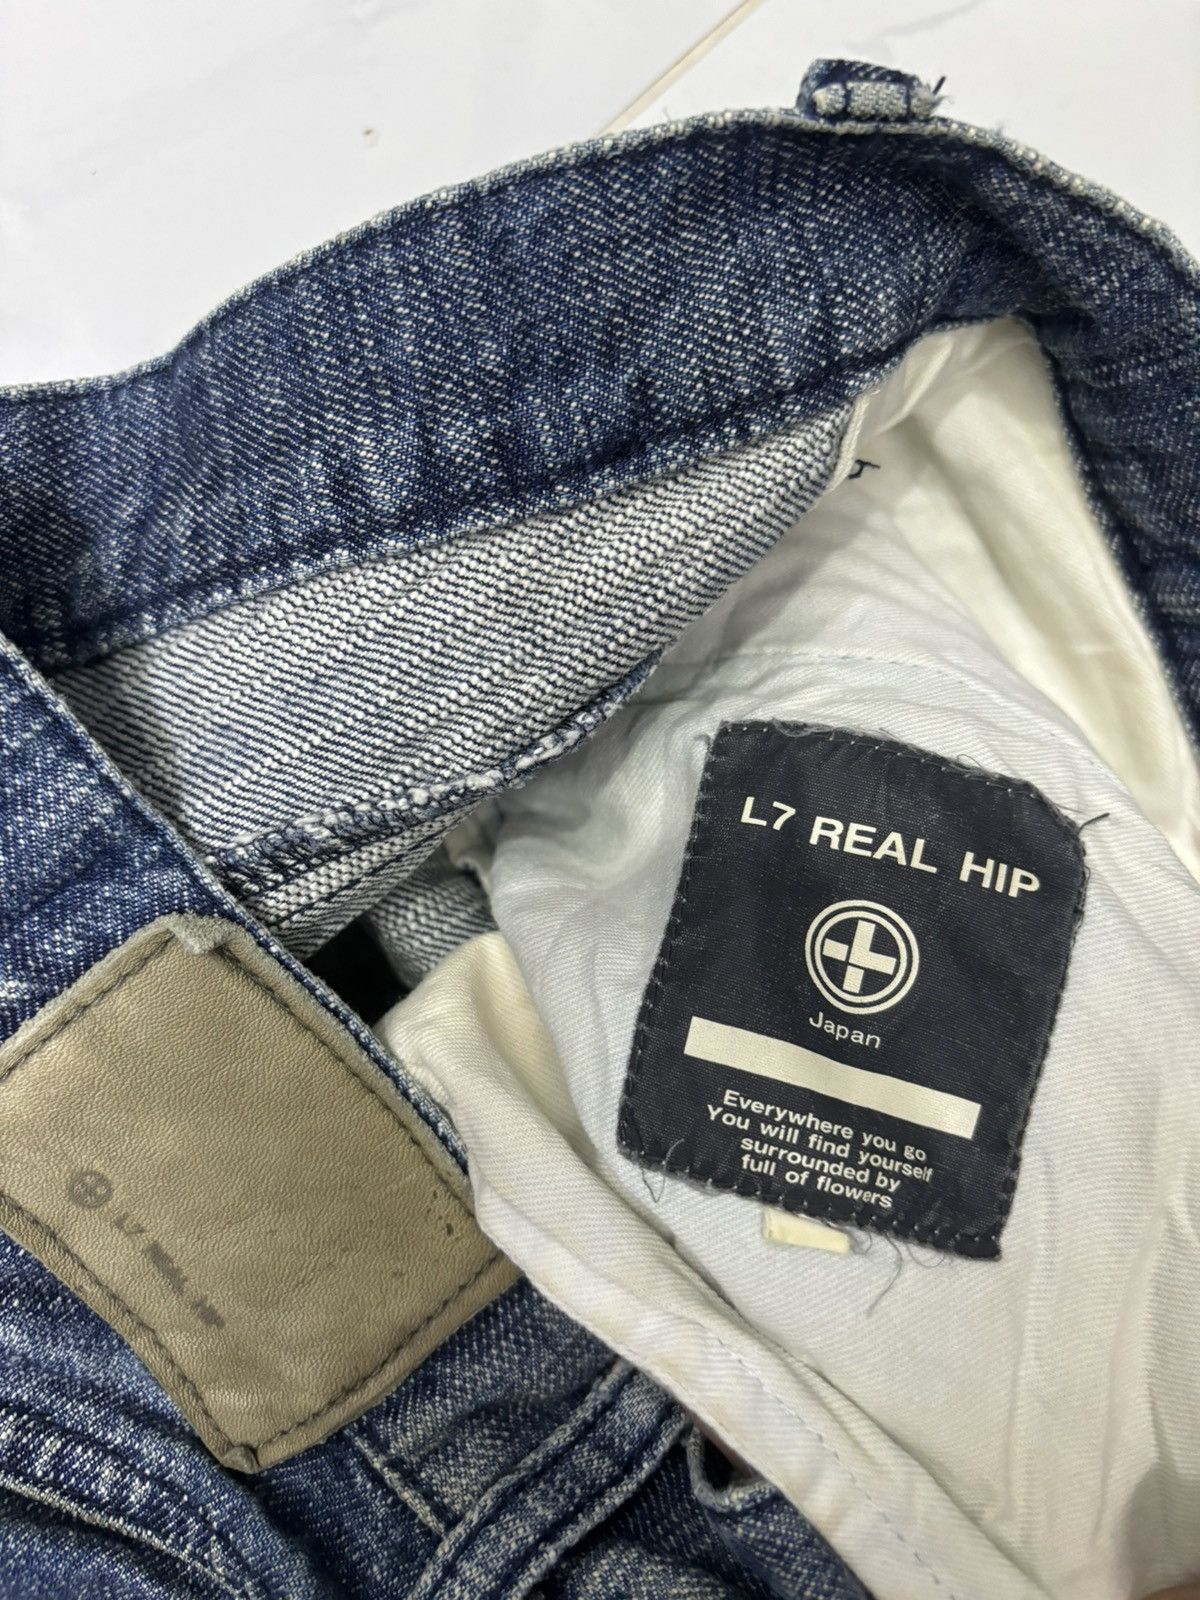 Archival Clothing - 🔥ARCHIVE L7 REAL HIP JAPANESE FLARED DENIM BOOTCUT JEANS - 10